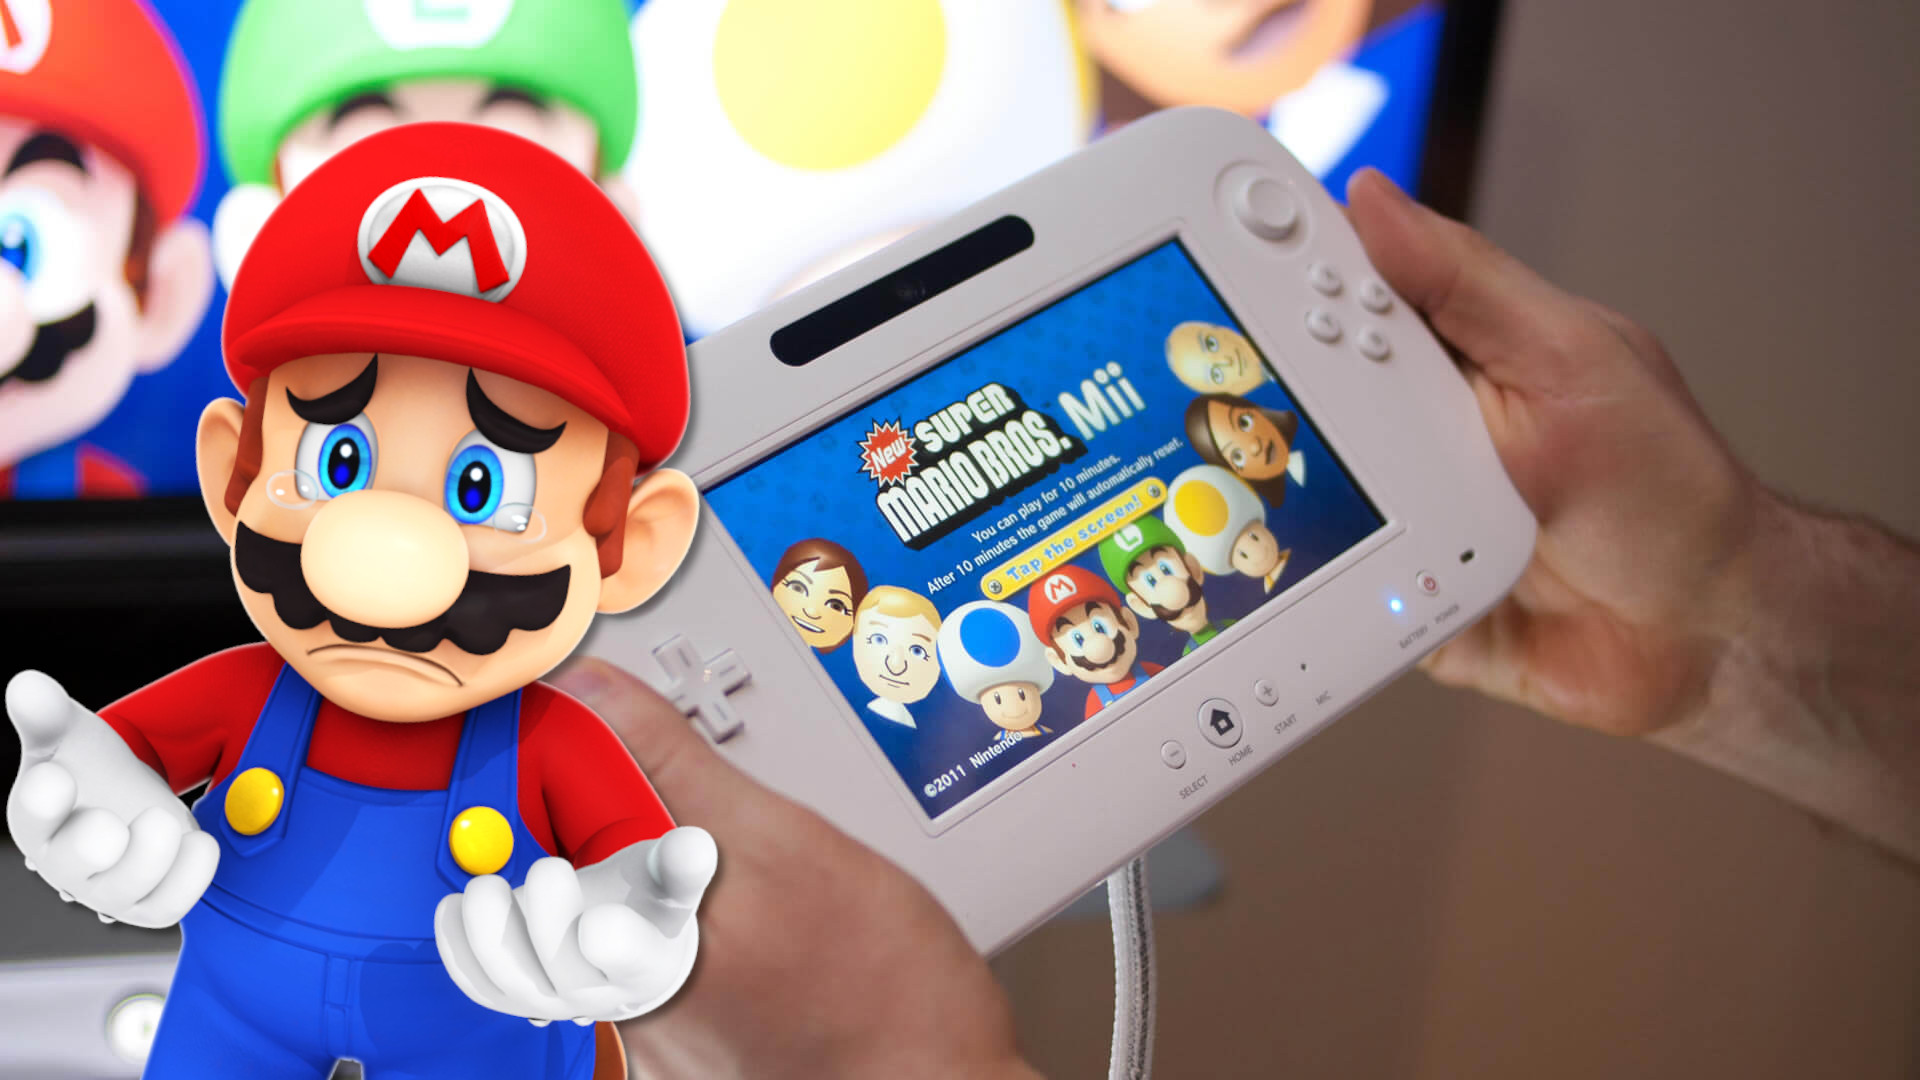 Nintendo Will End eShop Purchases For Wii U And 3DS Next Year